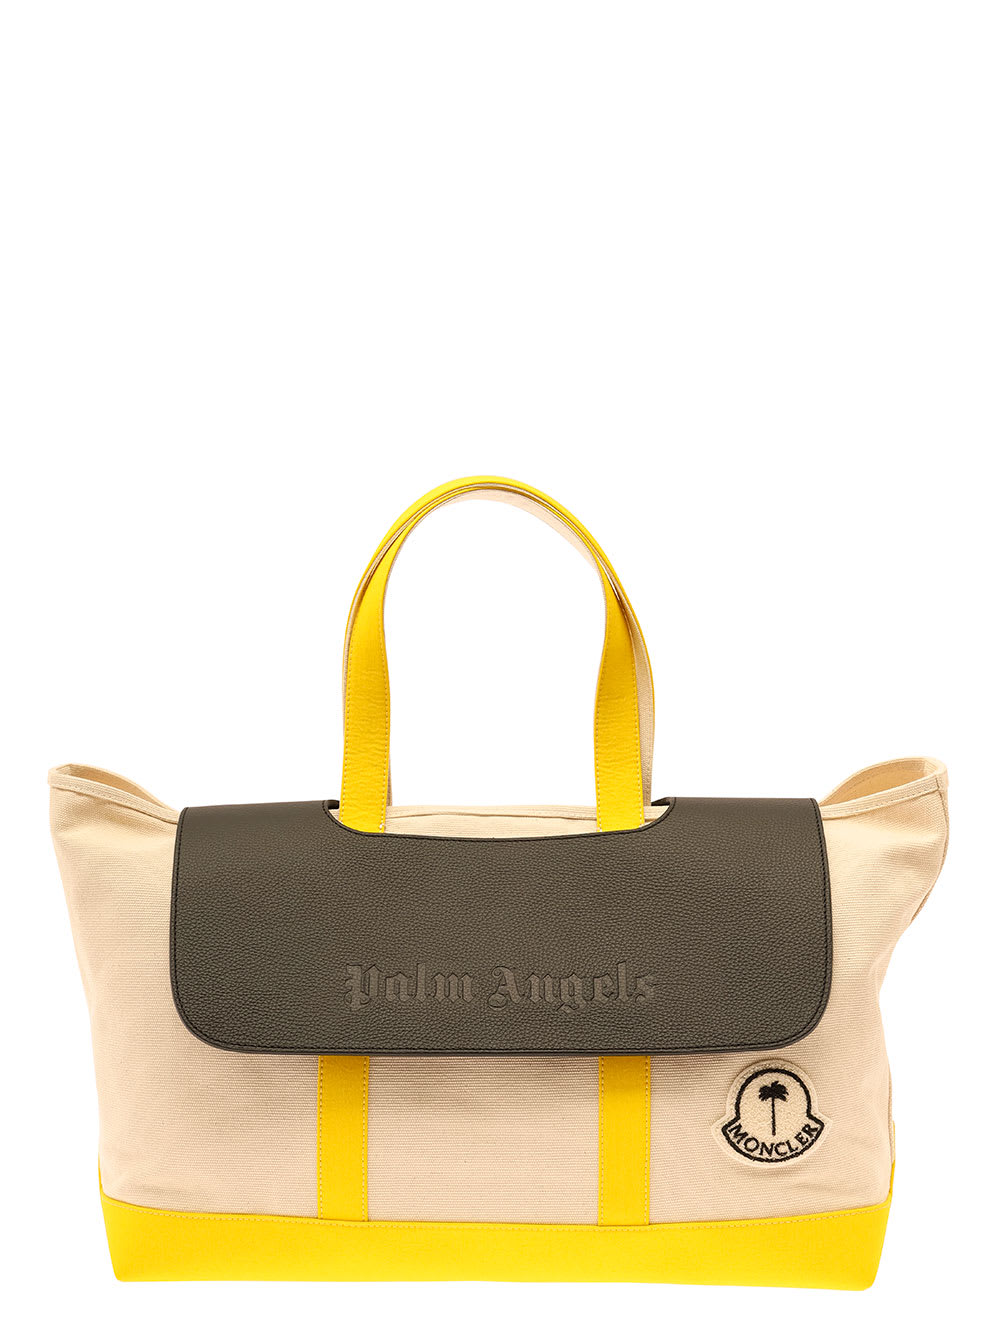 Moncler Genius Multicolor Tote Bag With Moncler X Palm Angels Patch In Canvas Woman In Beige